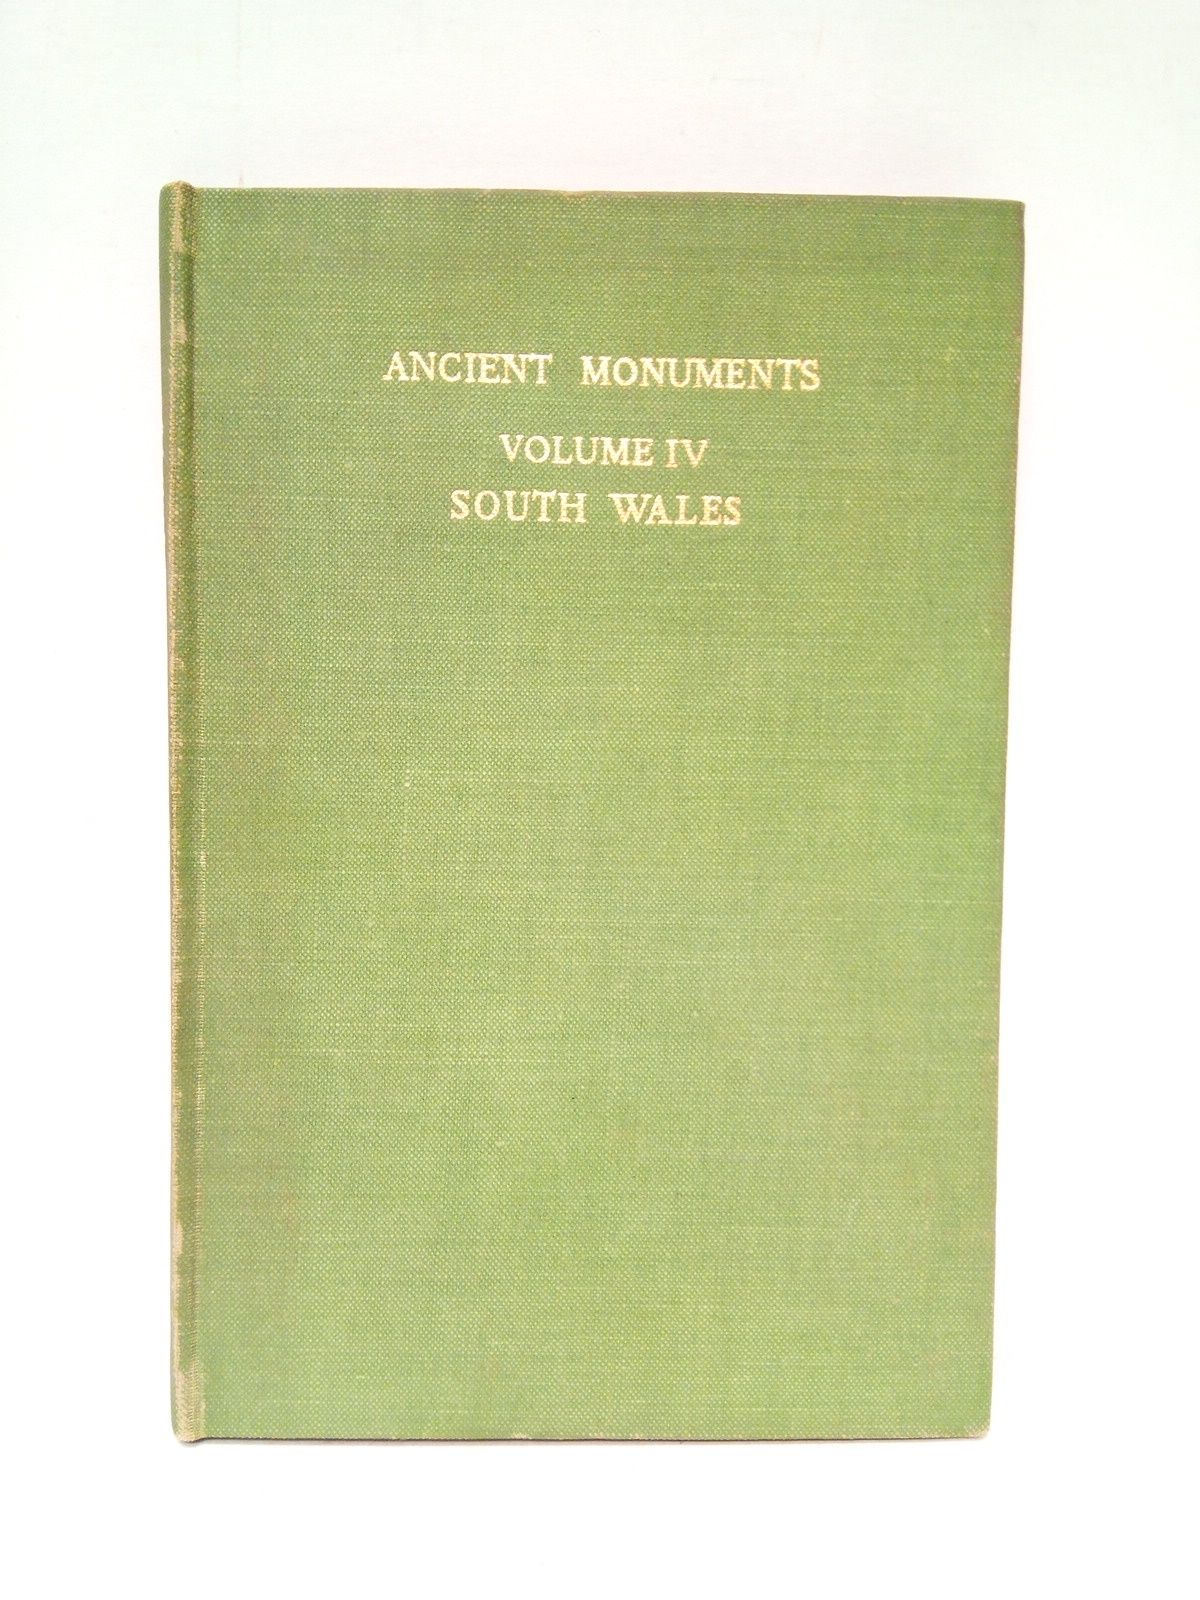 FOX, Sir Cyril - Ancient Monuments under the ownership or guardianship of His Majesty's Office of Works. Volume IV.: SOUTH WALES